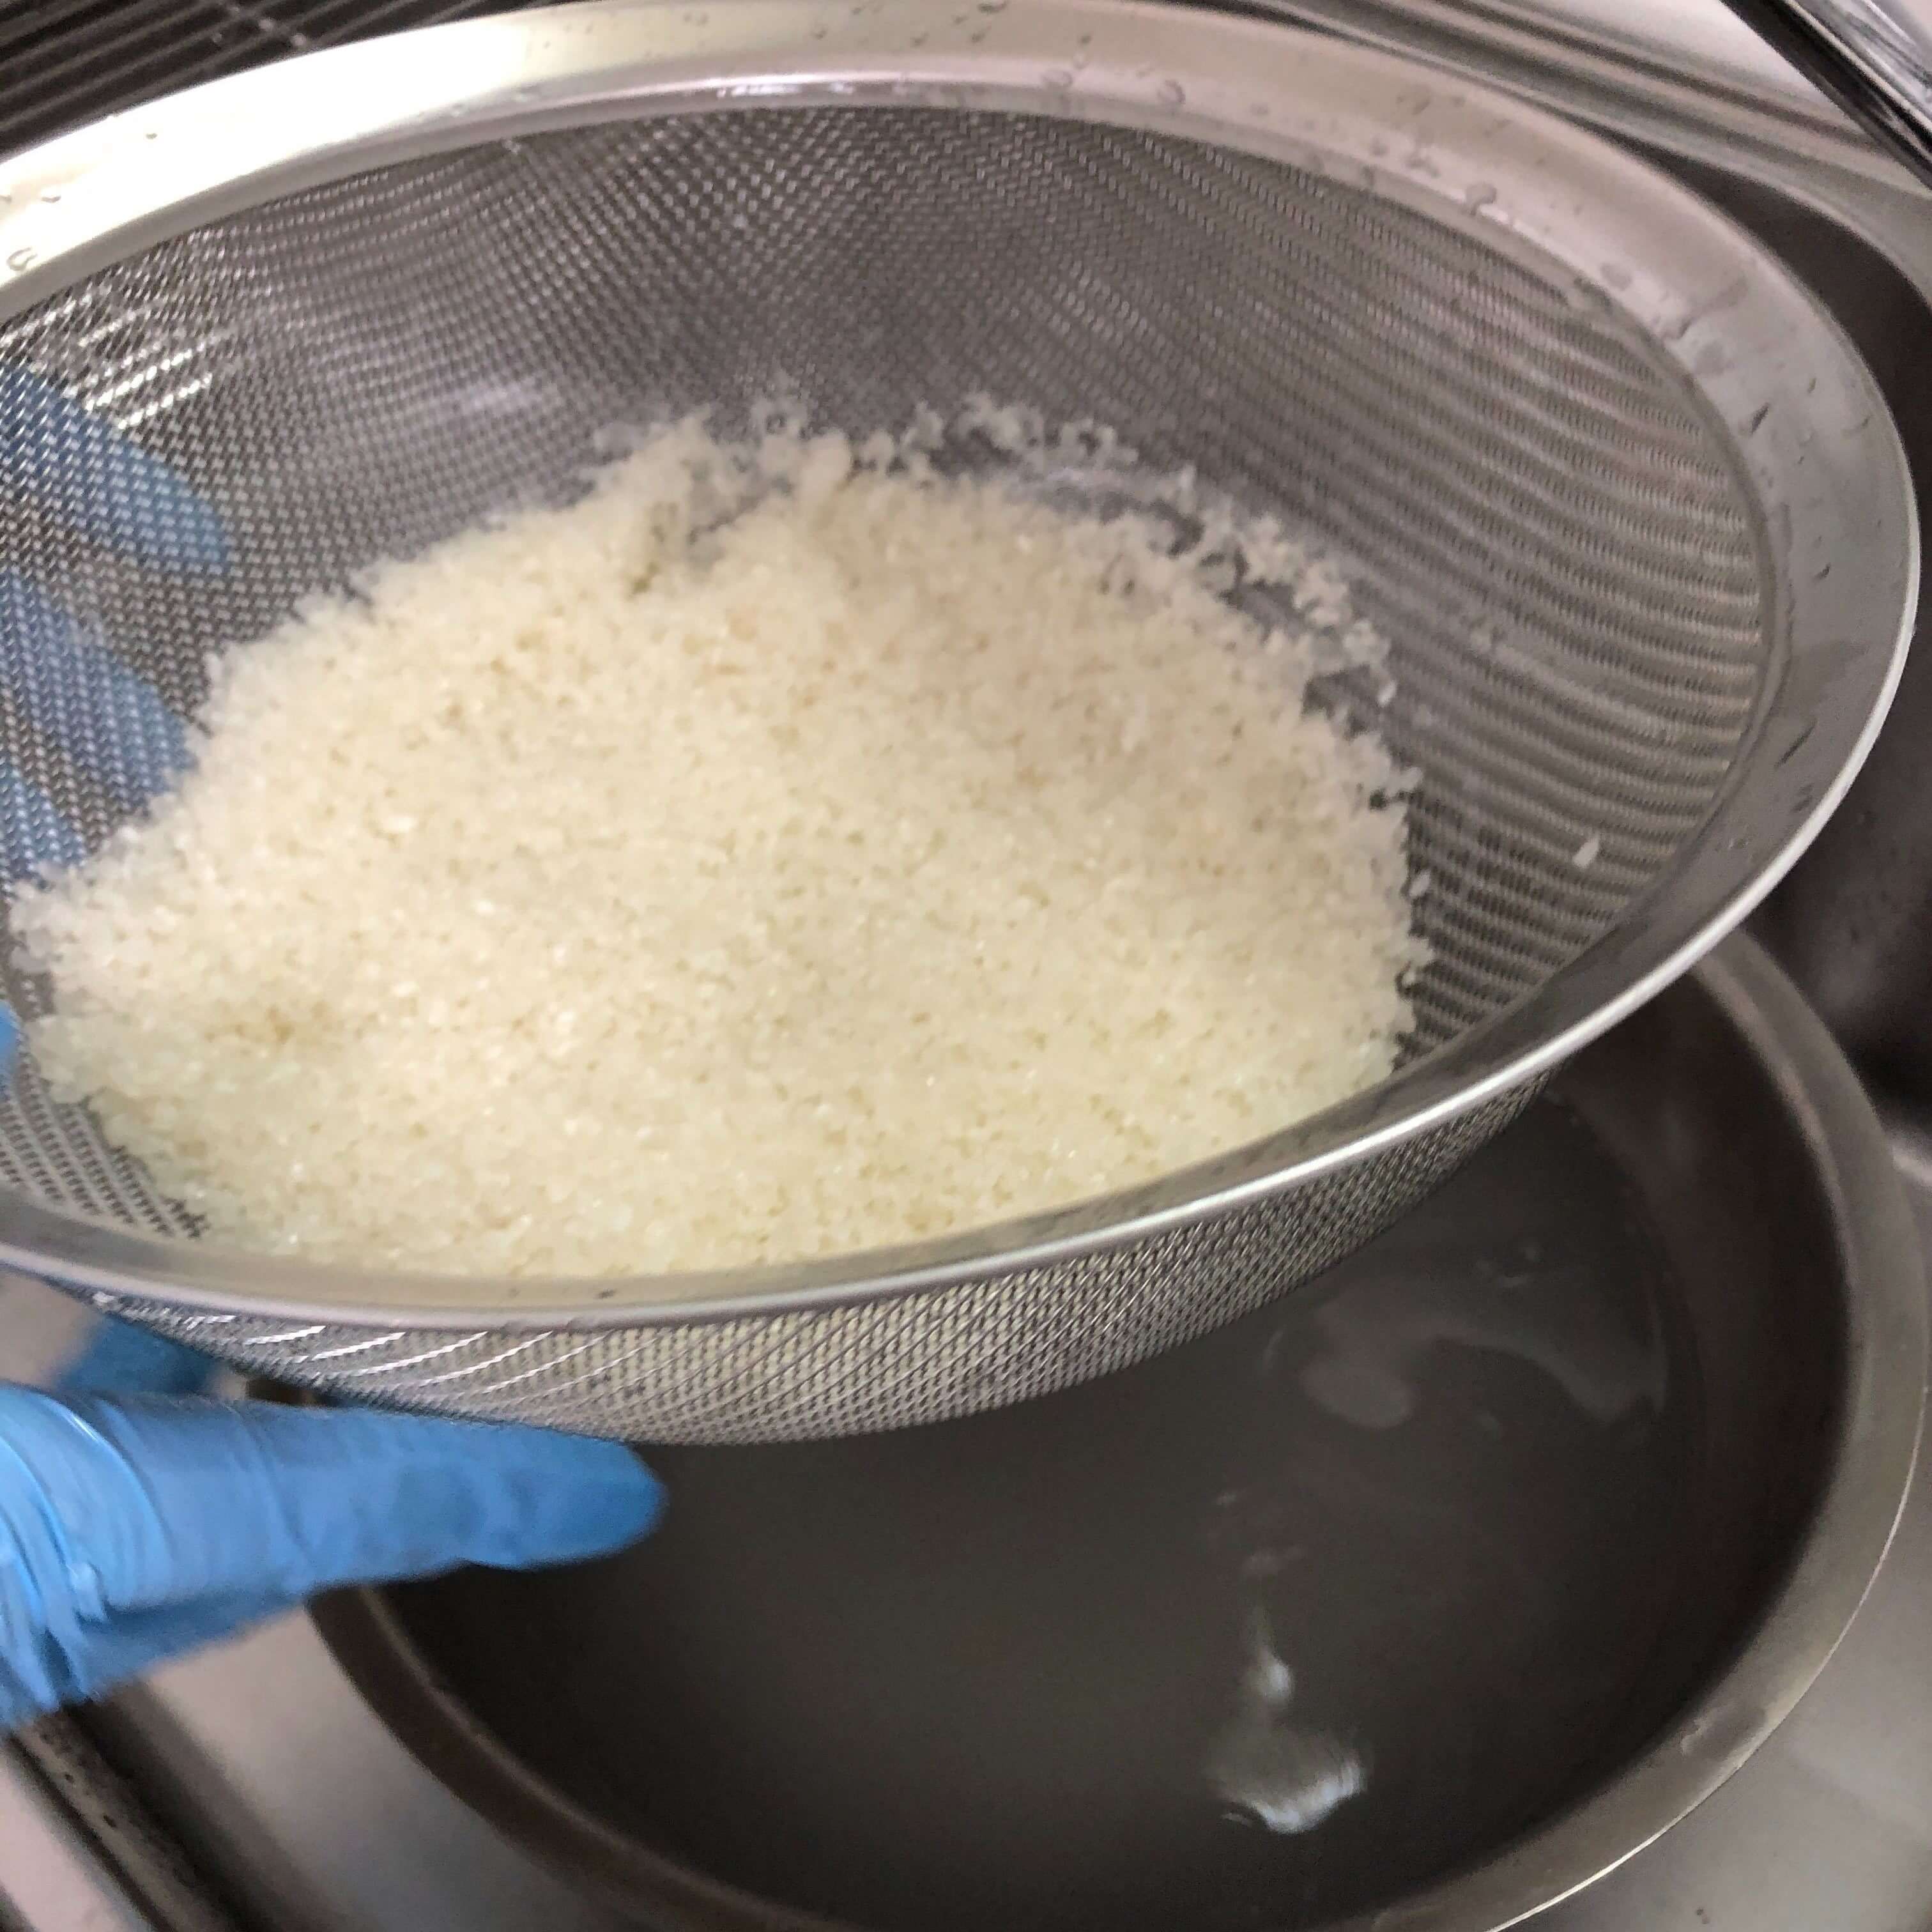 Step 2: How to make Japanese rice in 8 steps